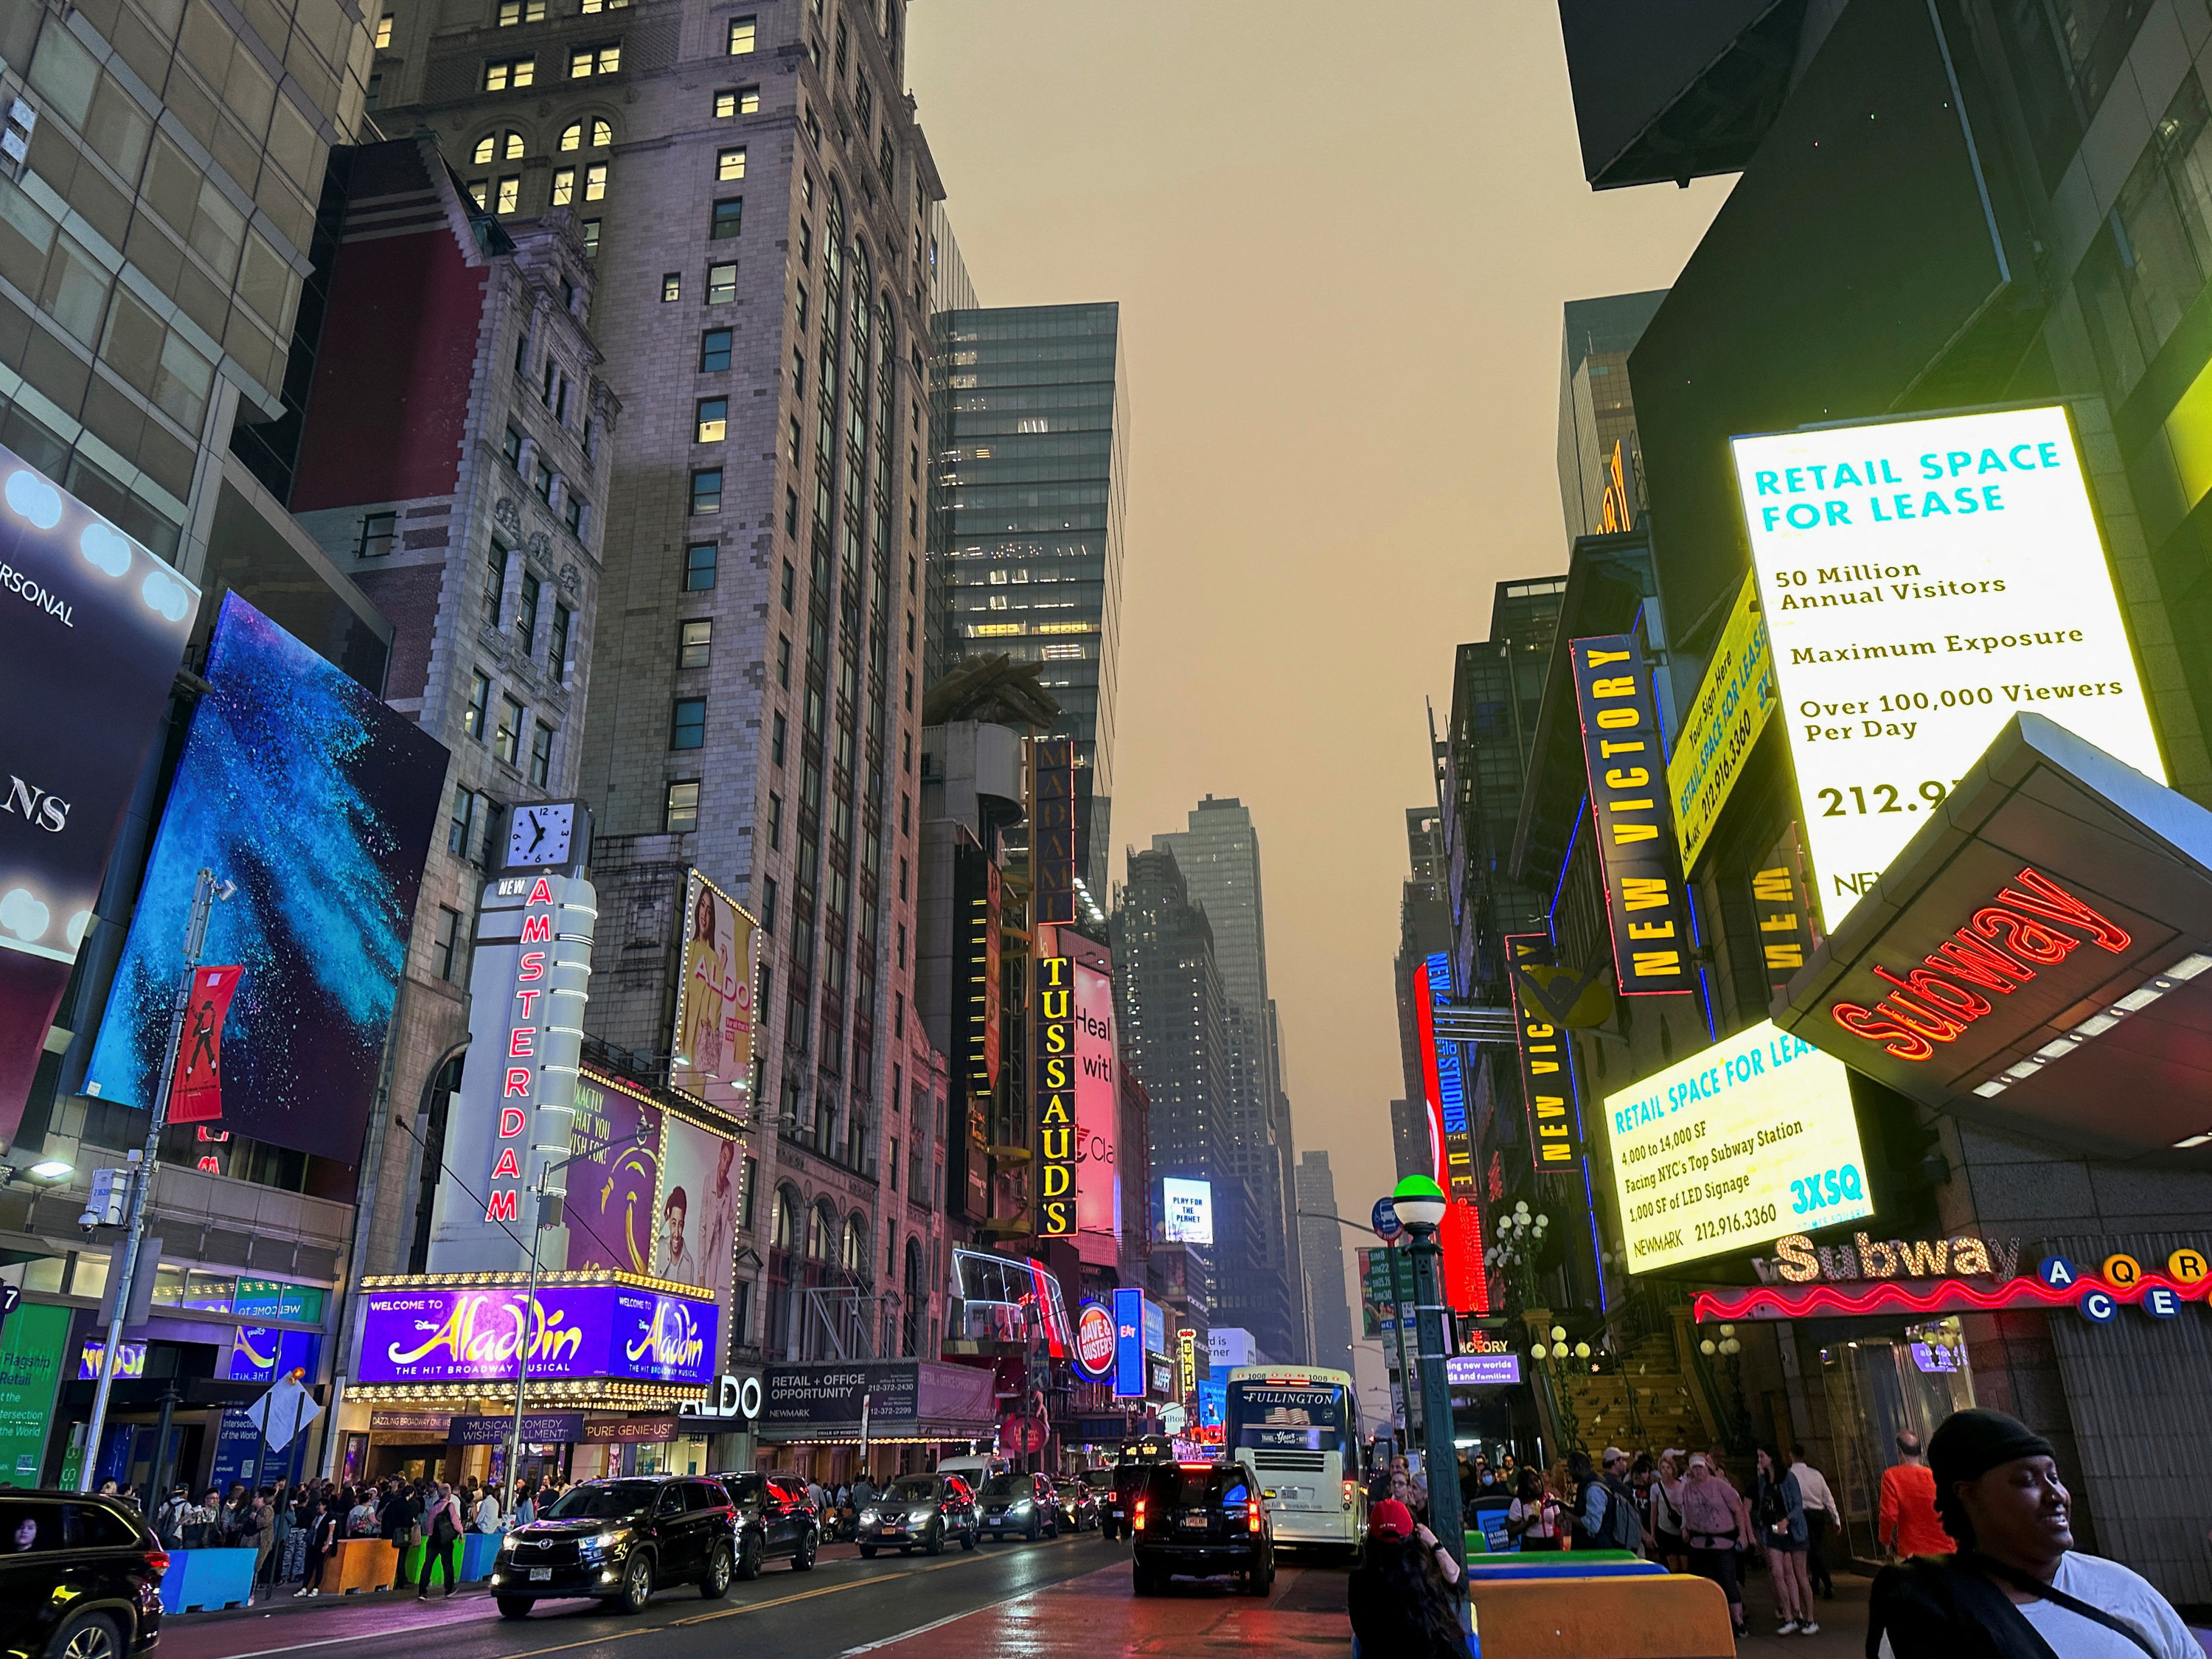 Times Square in Manhattan is shrouded in haze and smoke